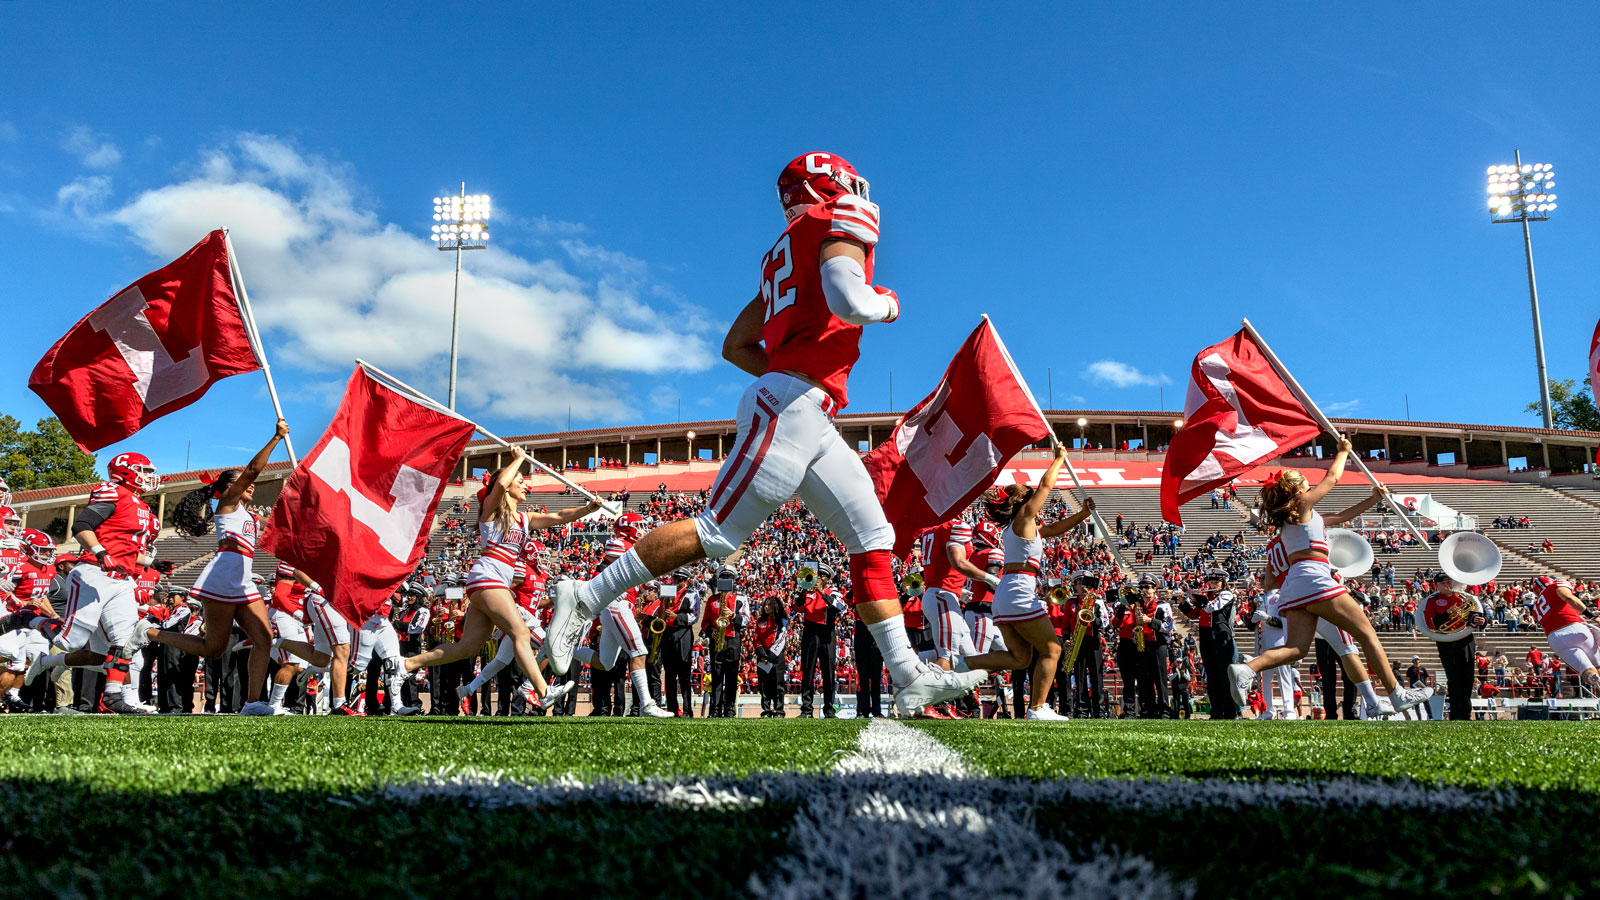 Cornell takes the field for the Homecoming football game against Yale at Schoellkopf